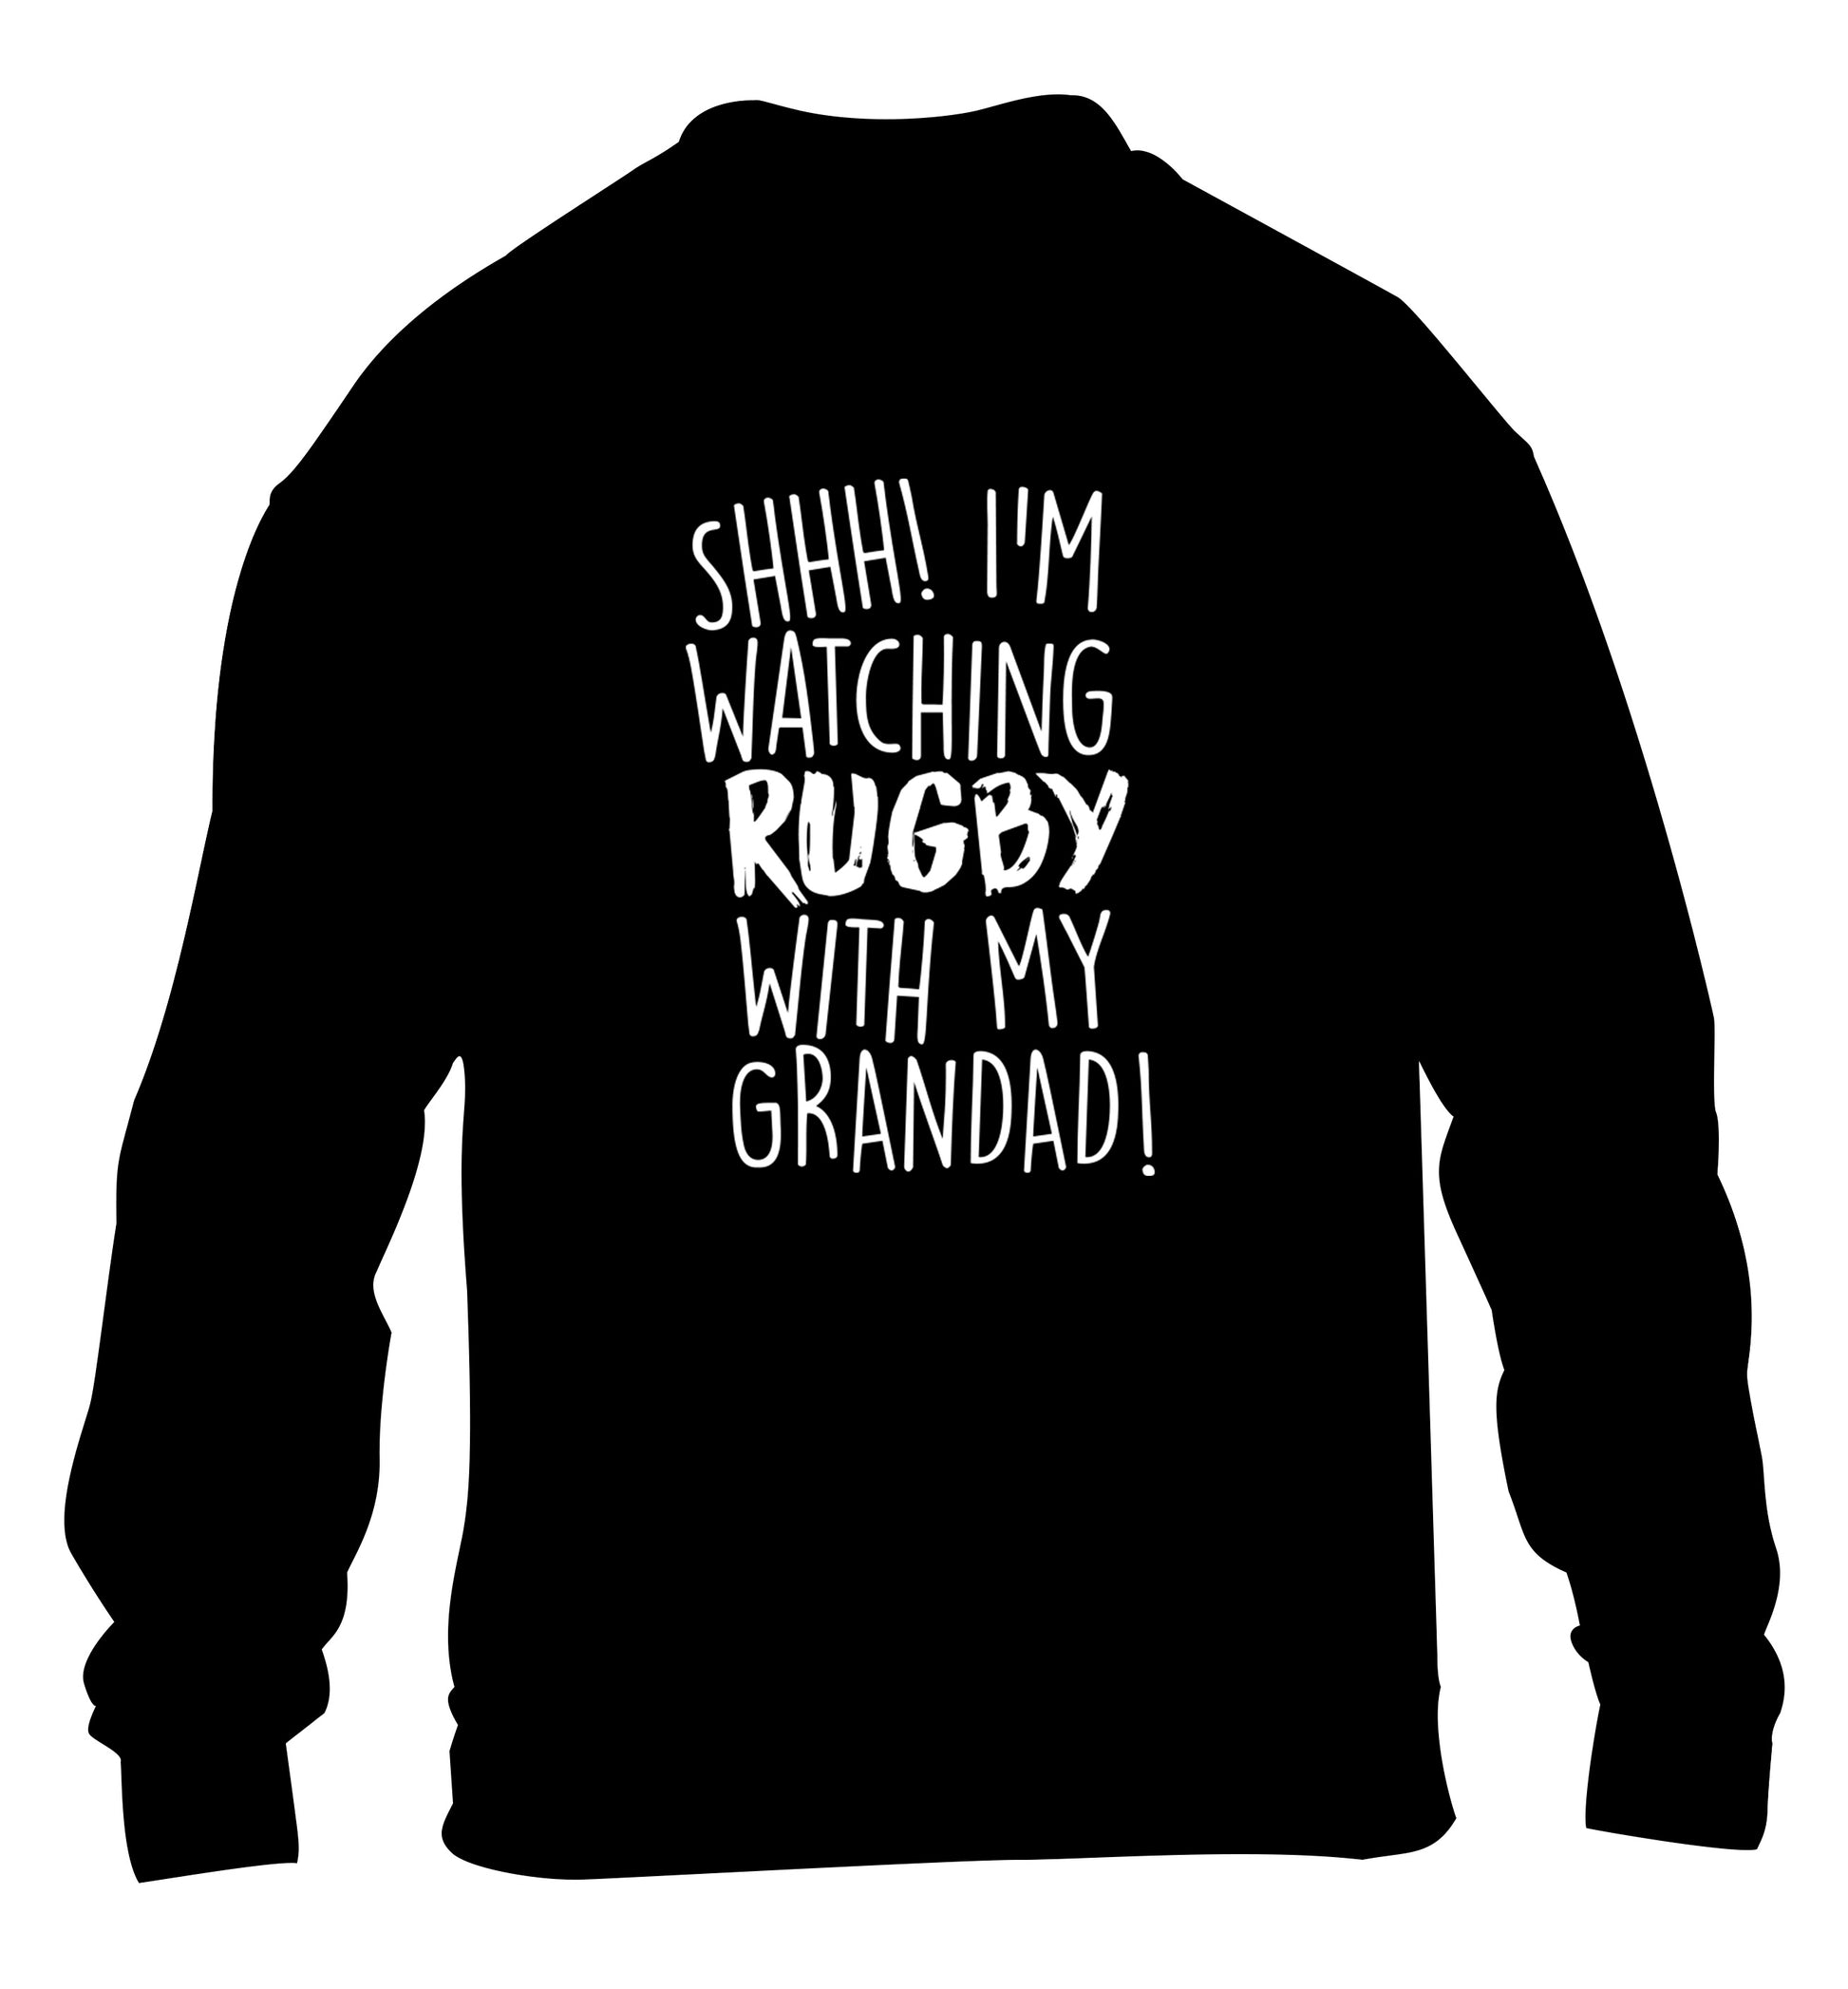 Shh I'm watching rugby with my grandad children's black sweater 12-13 Years